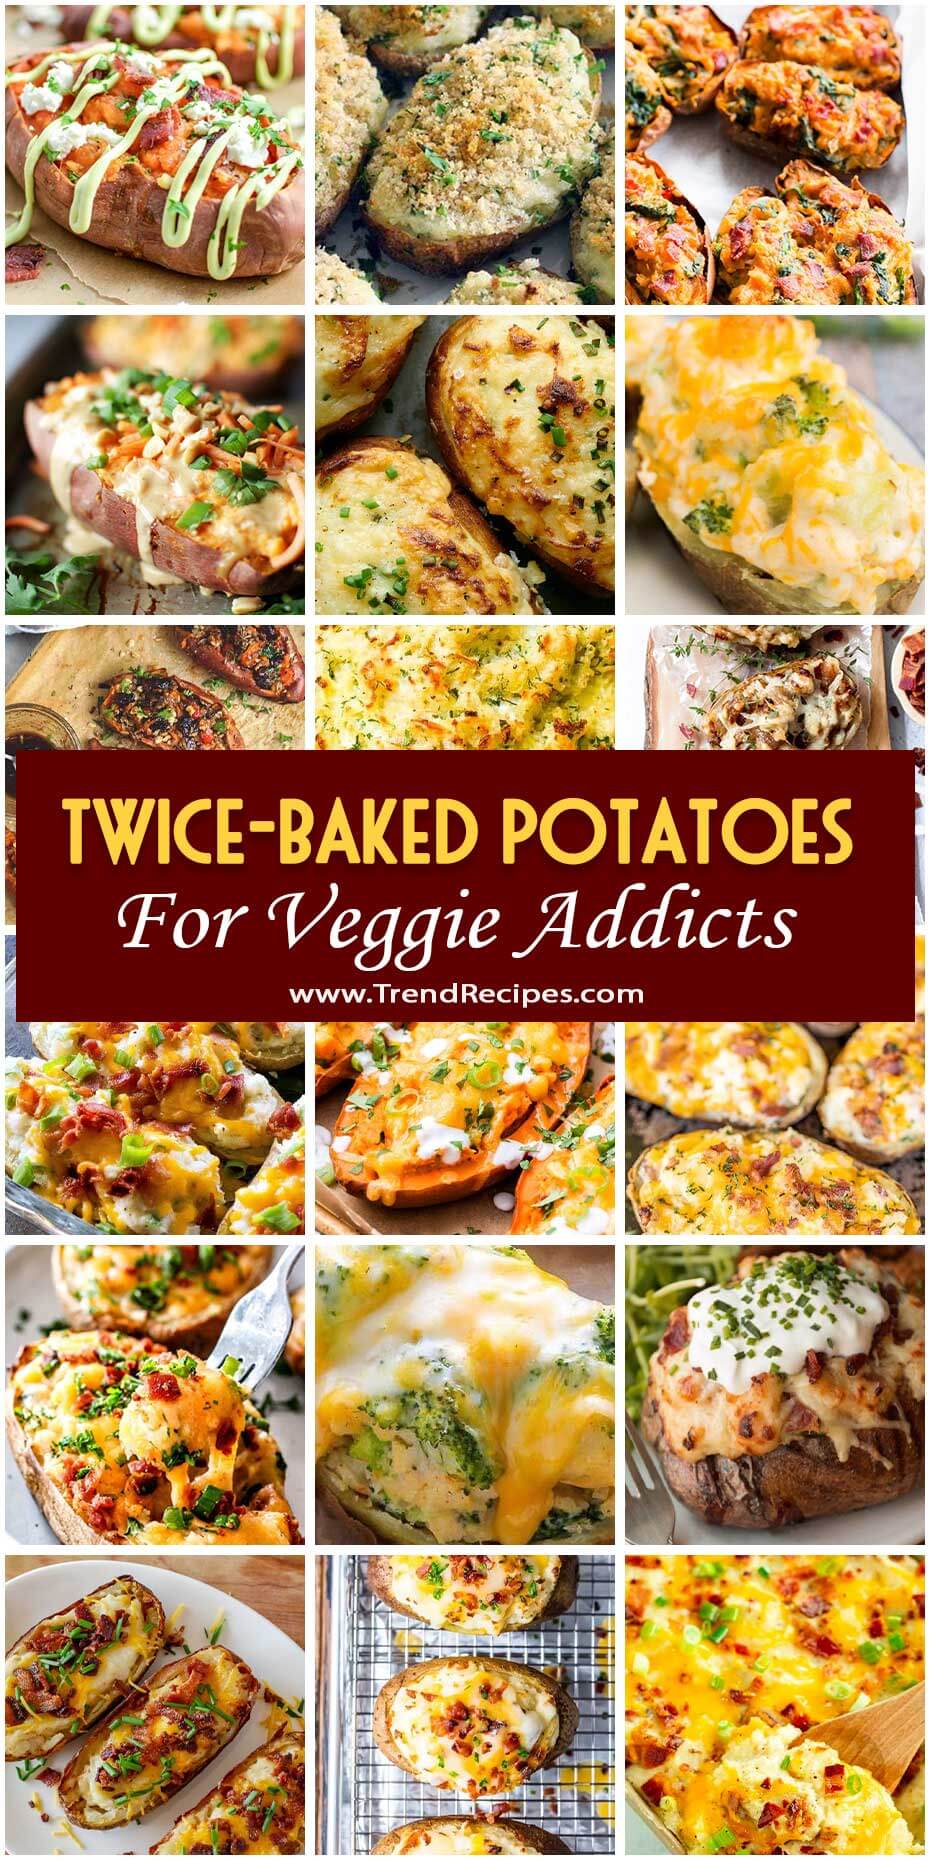 25 “Irresistible” Recipes For Twice-Baked Potatoes, Twice-Baked Potatoes